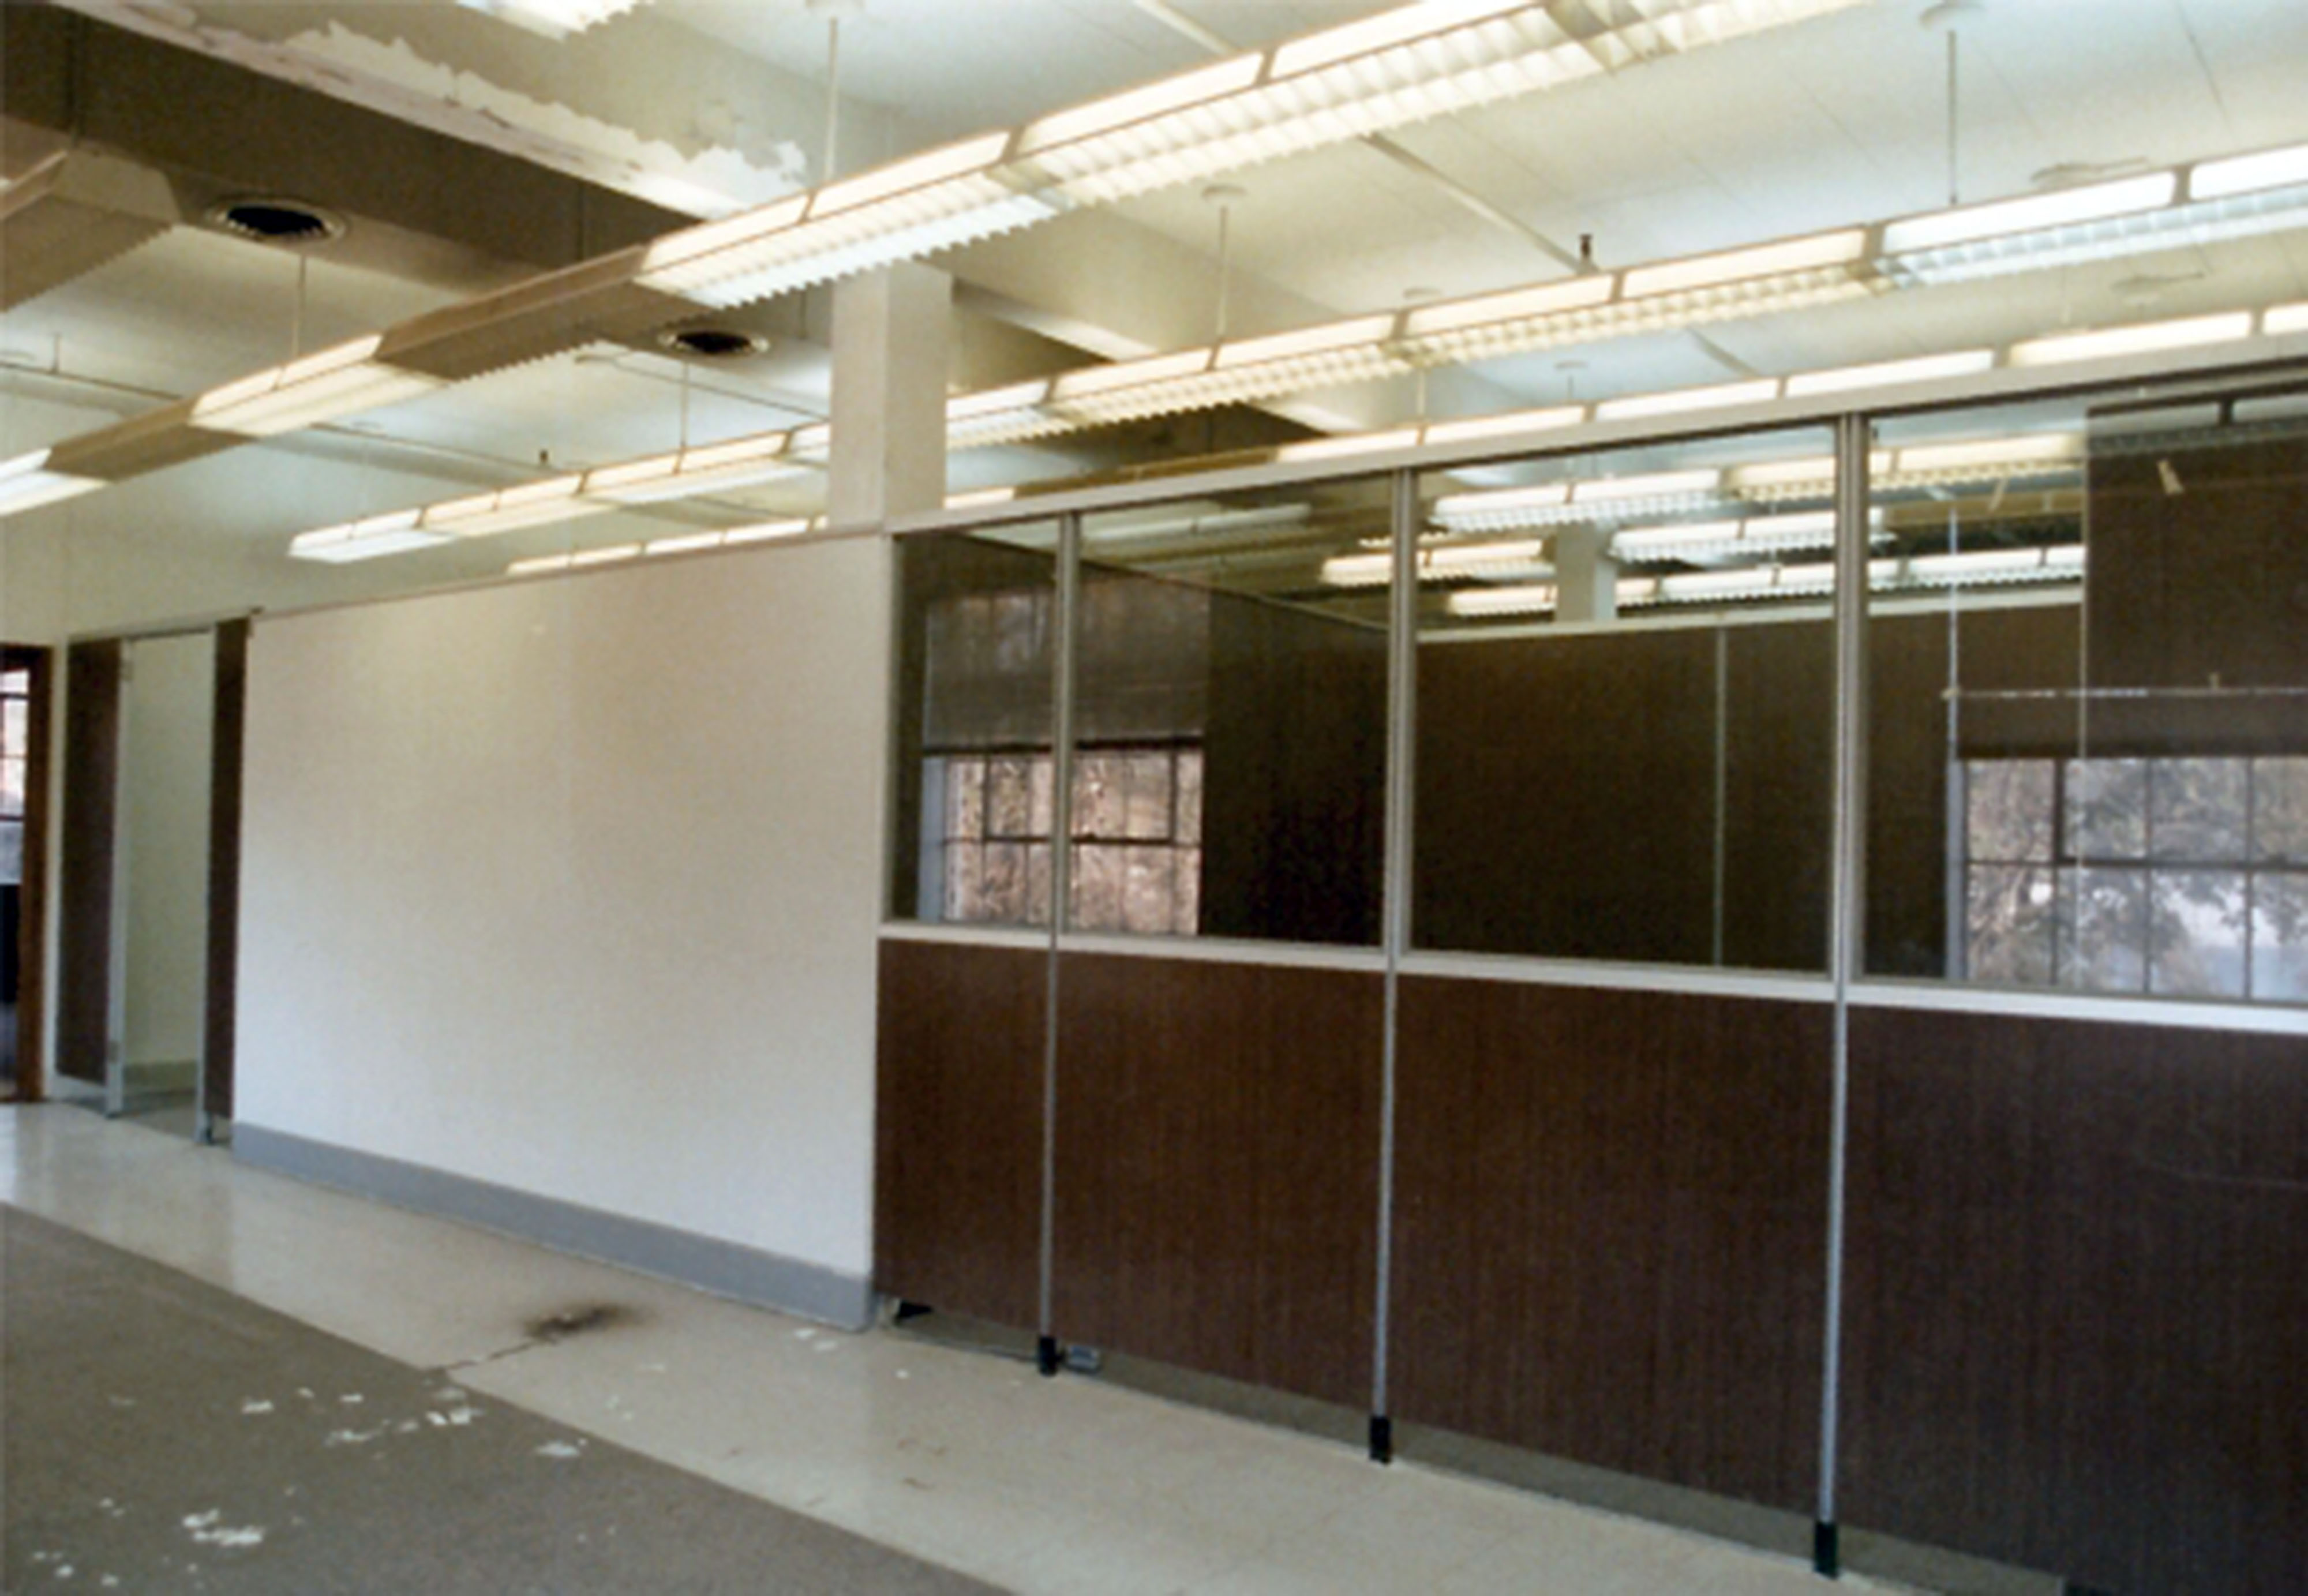 Second Floor Offices